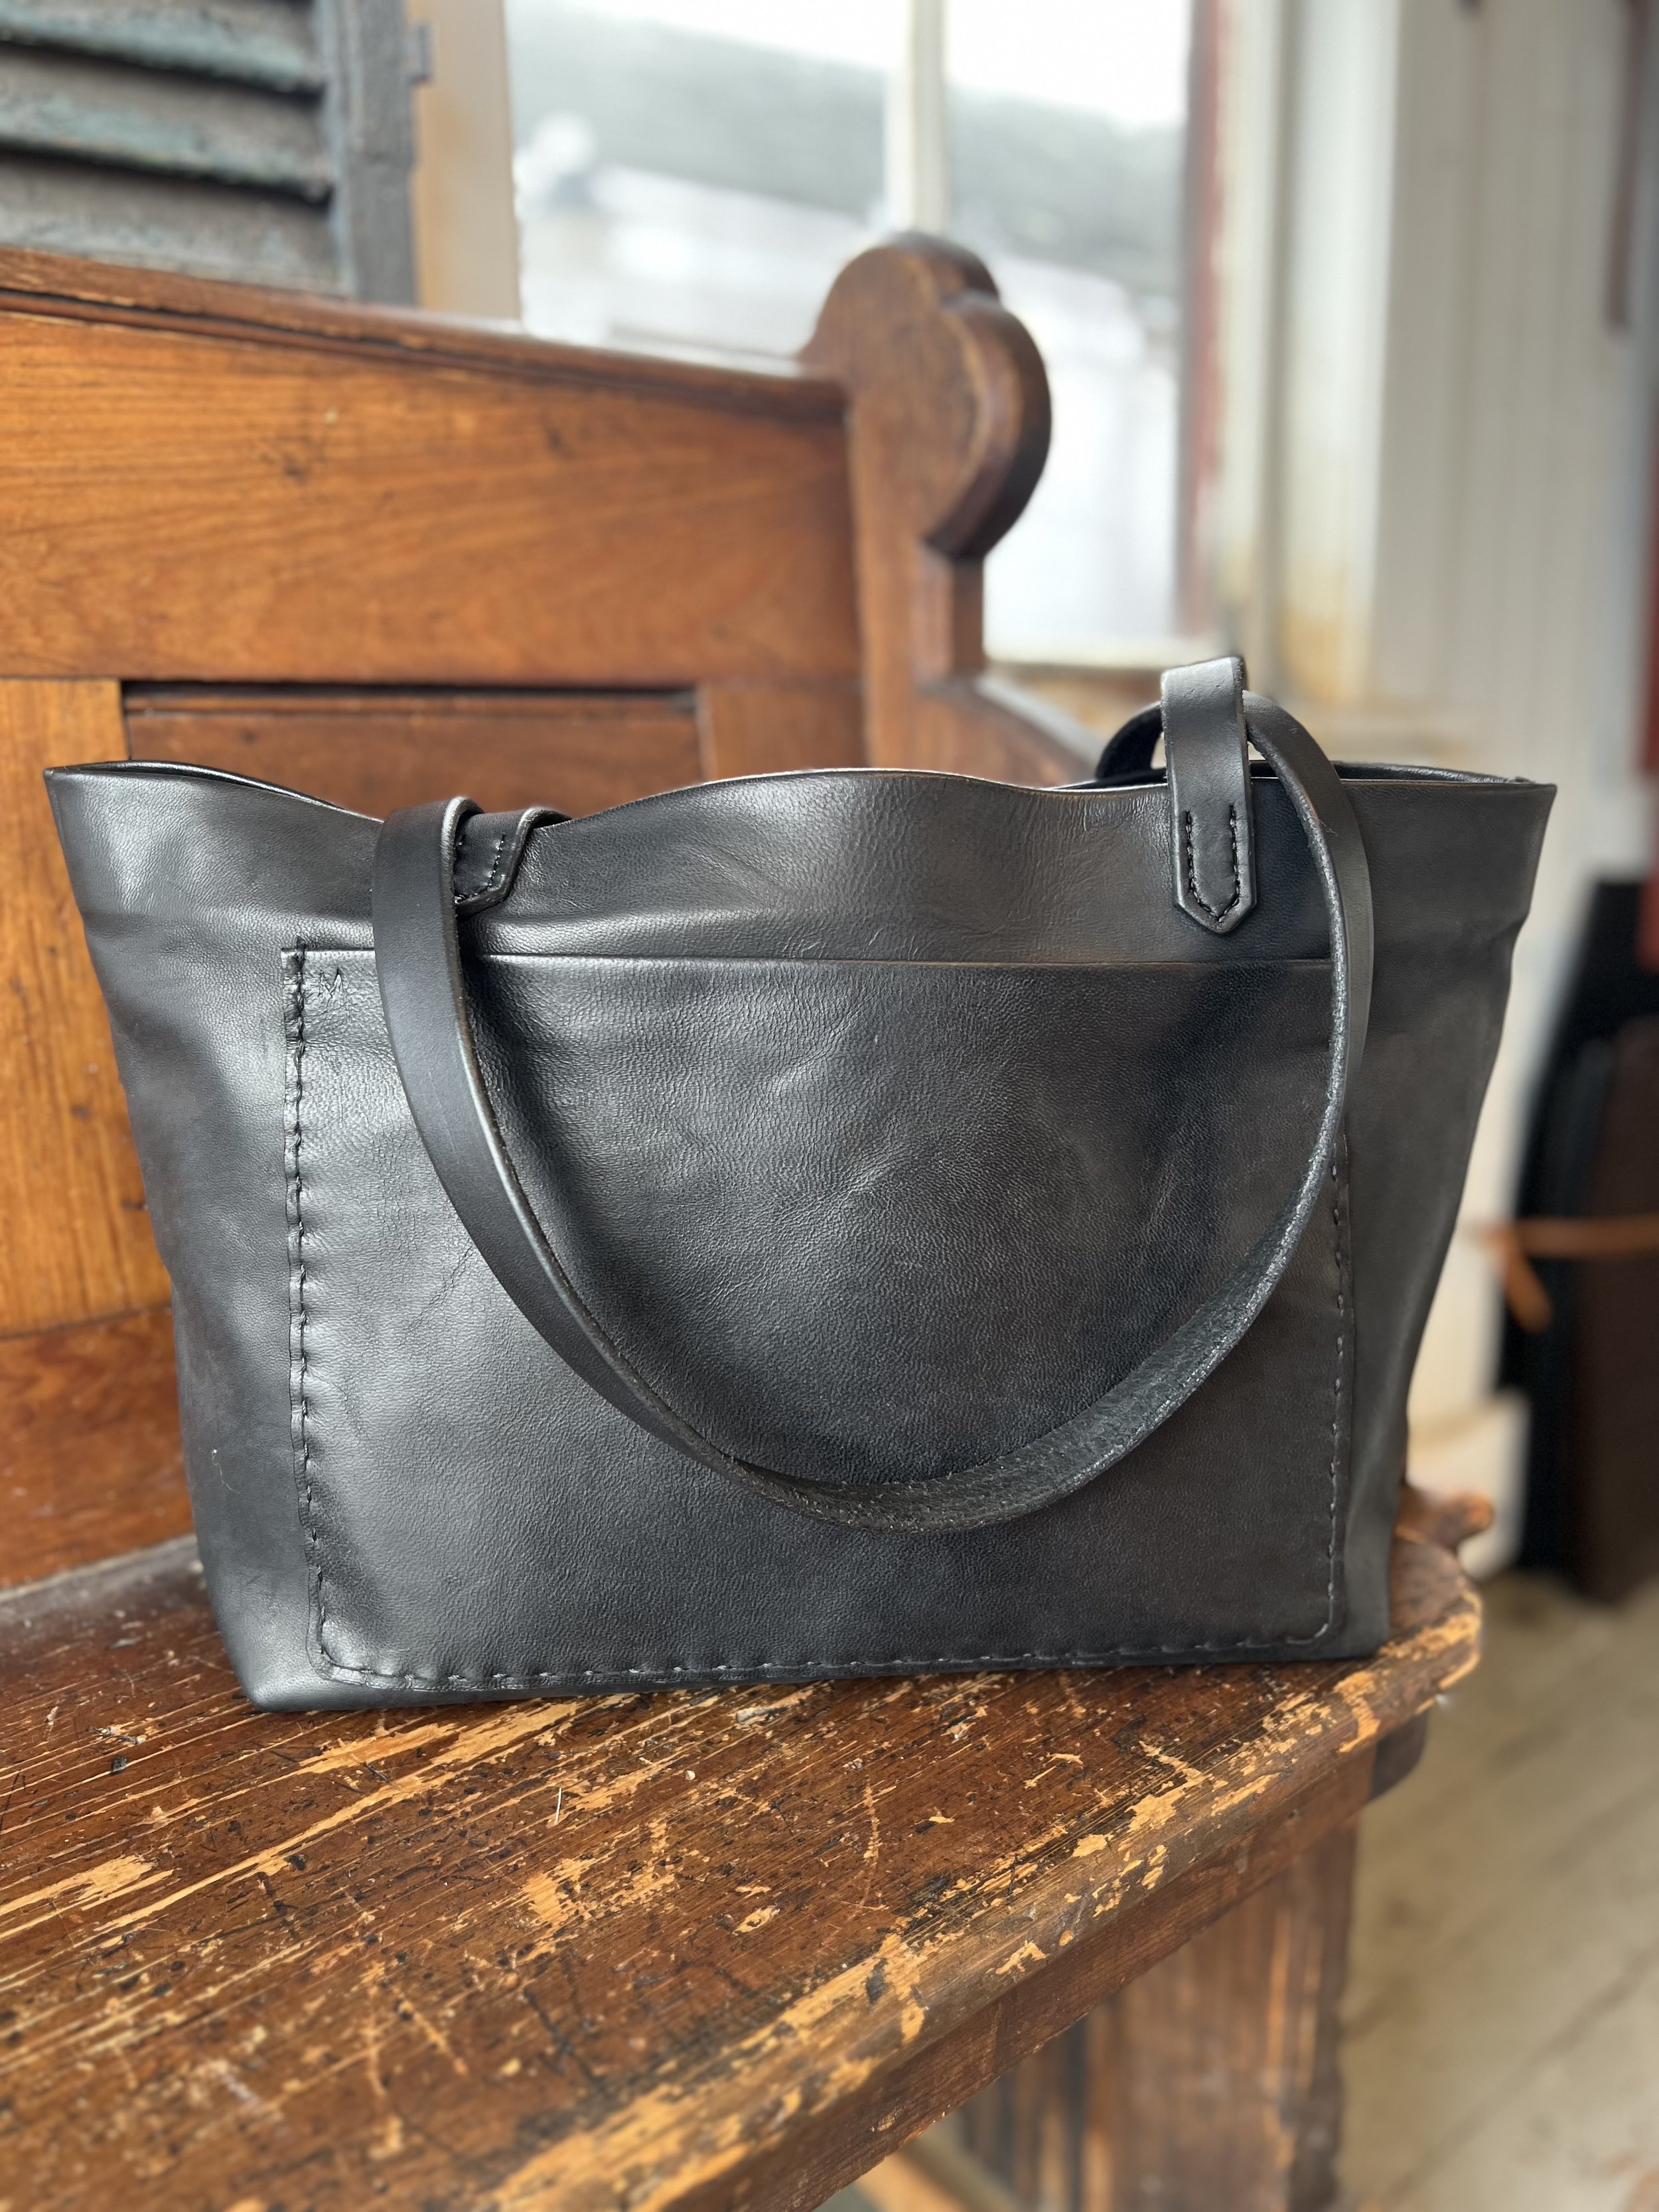 SHOP — MAUCLERE LEATHER